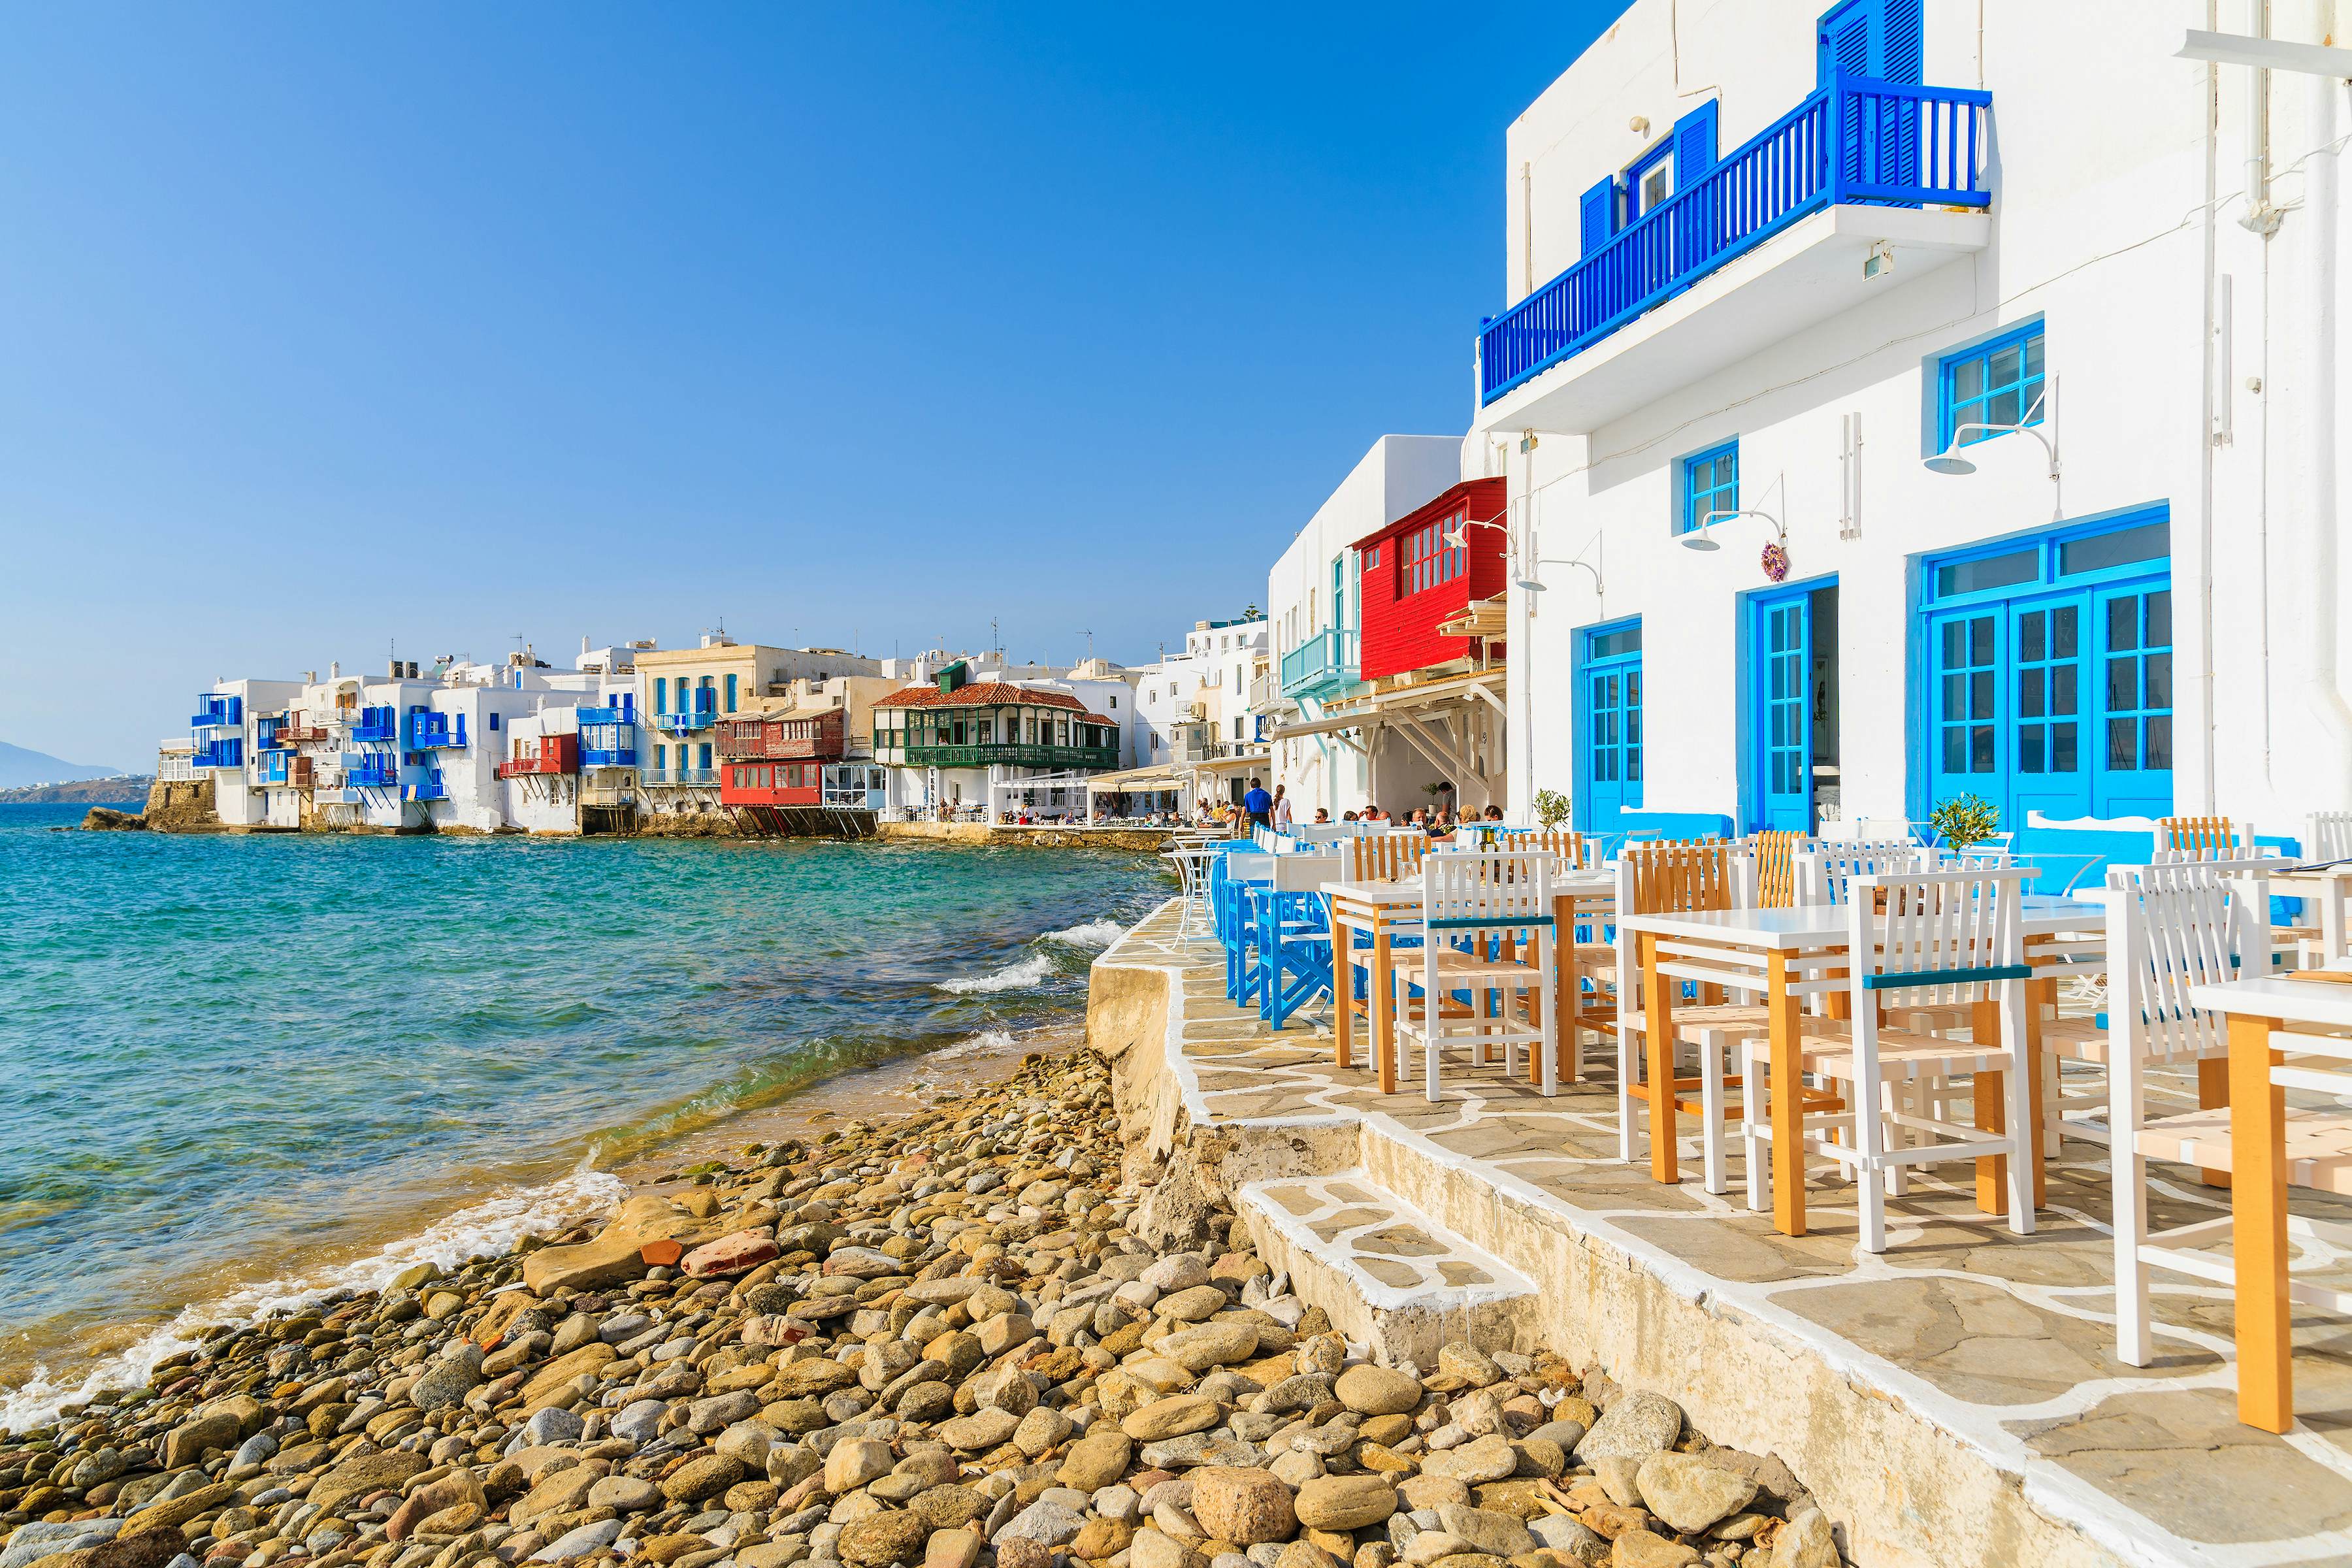 Top 10 Places to Visit in Greece